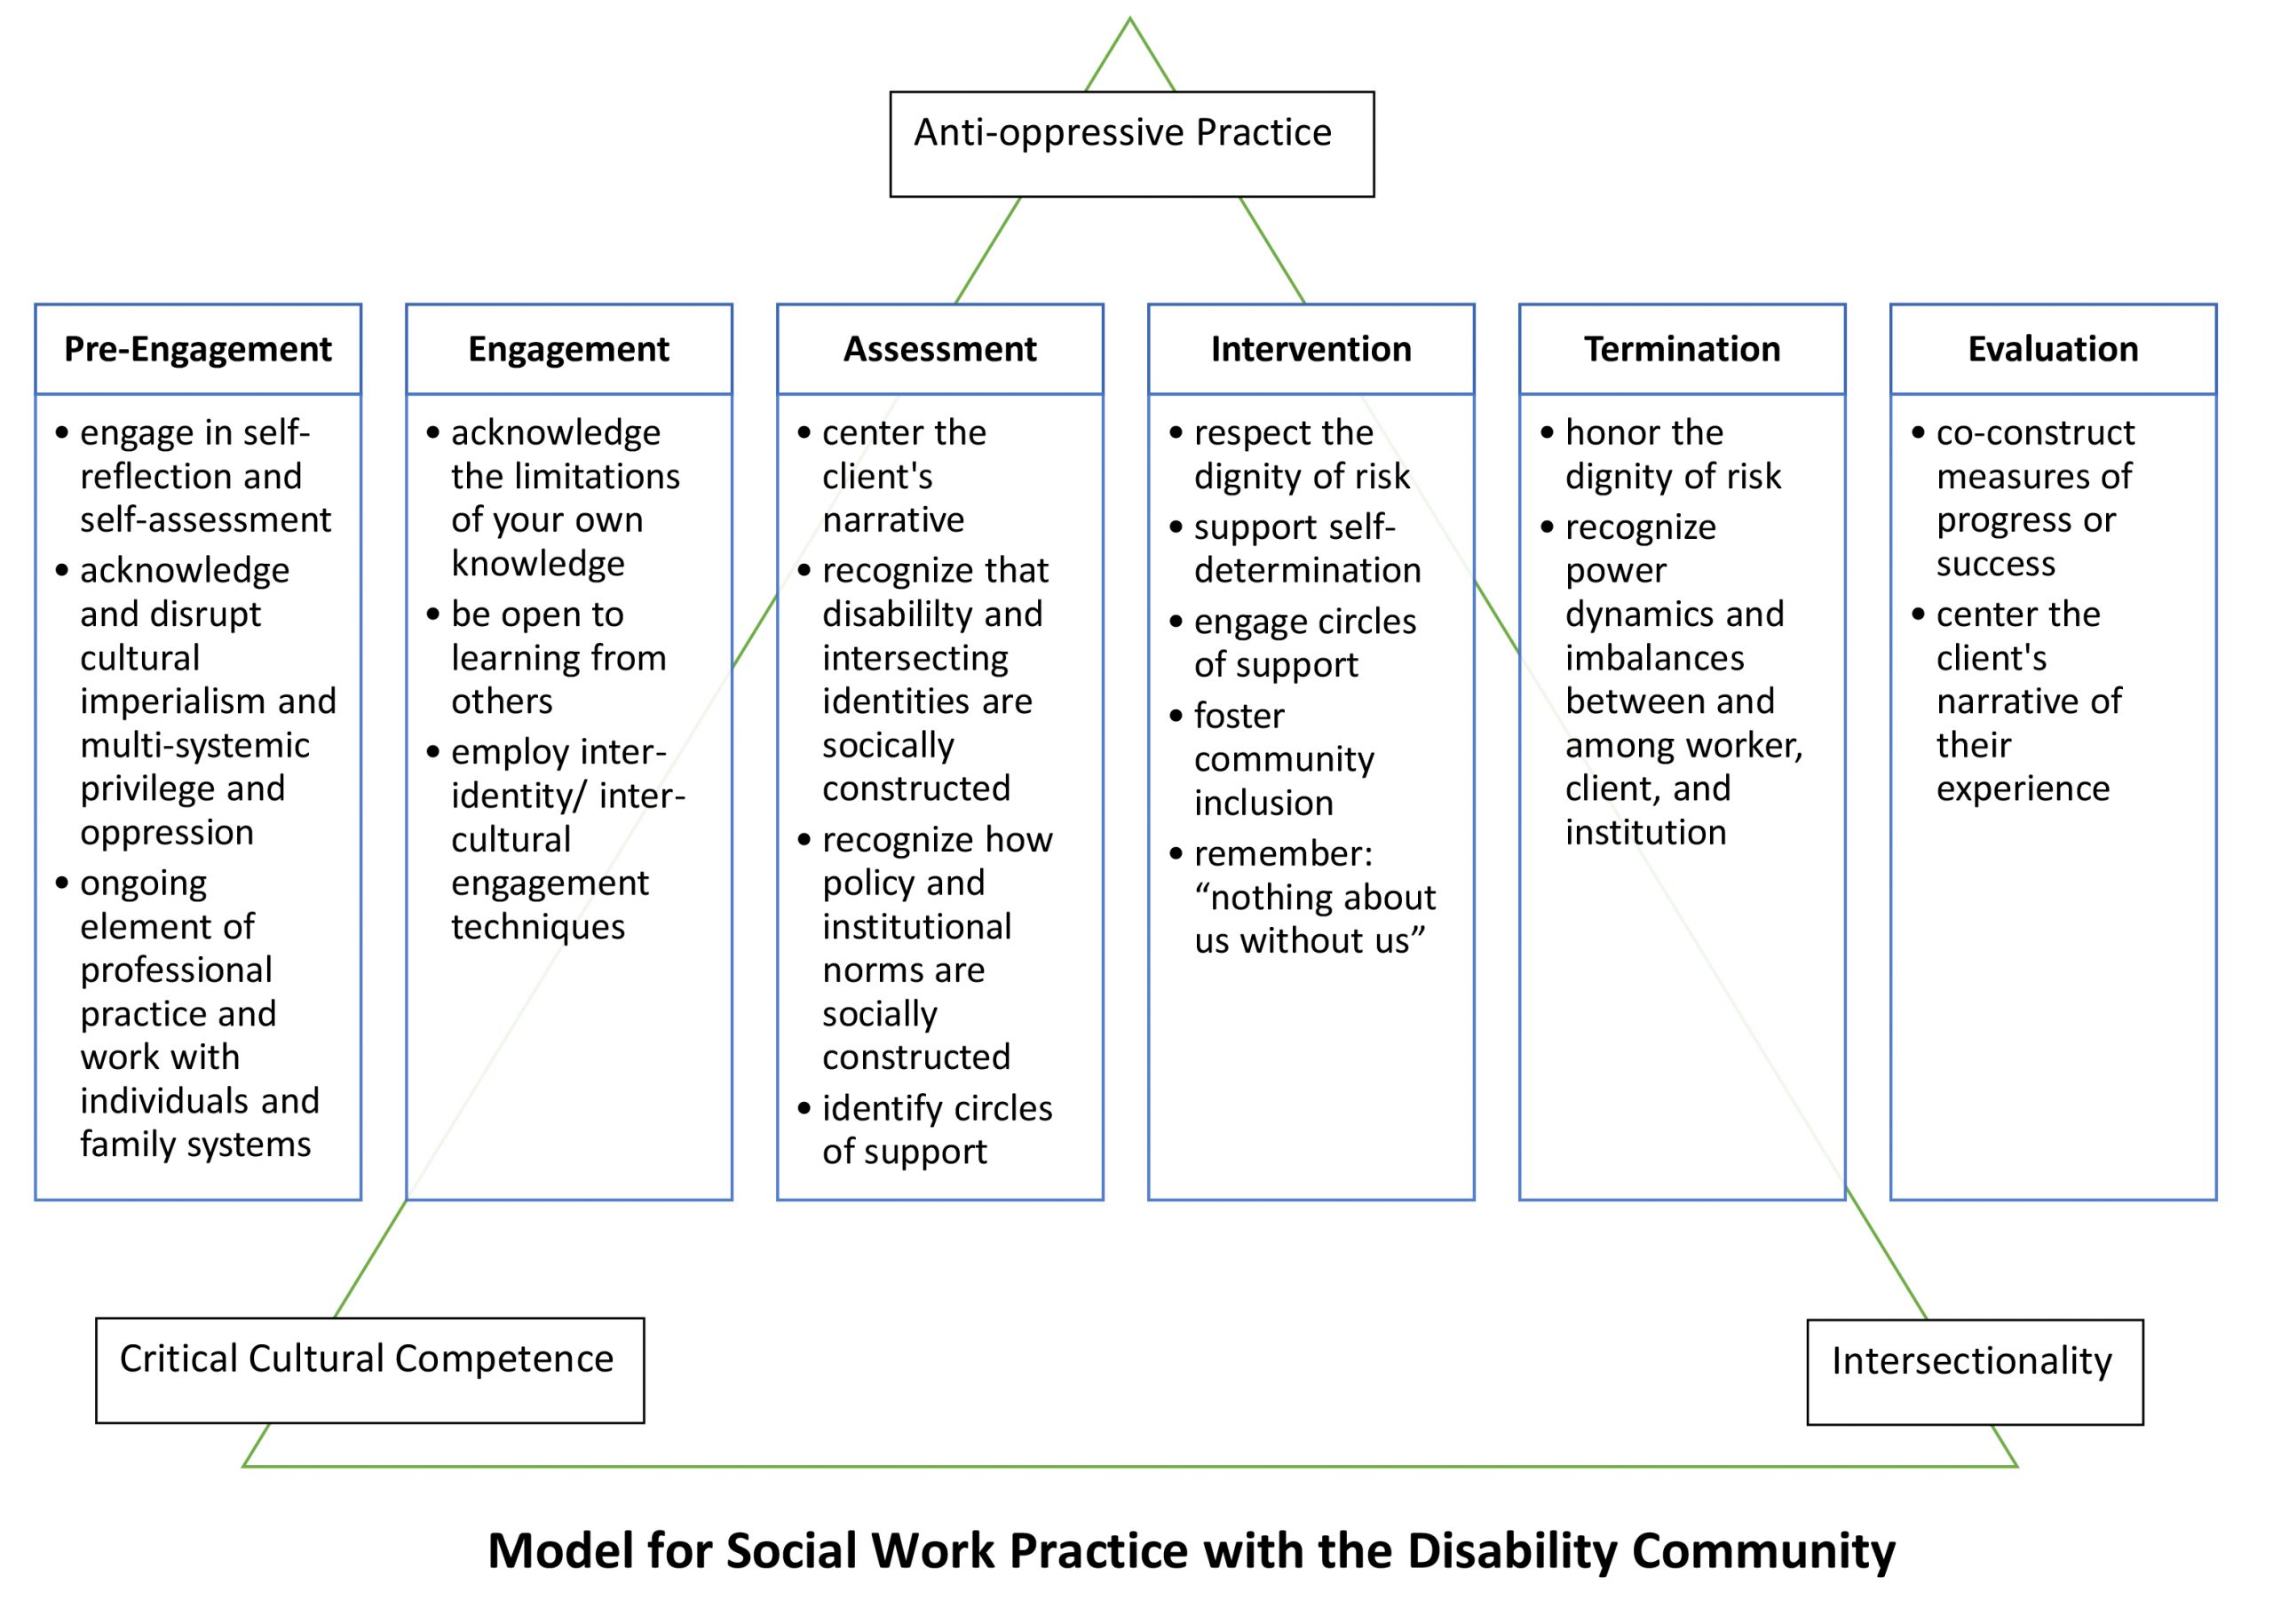 Model for social work practice with the disability community 2021